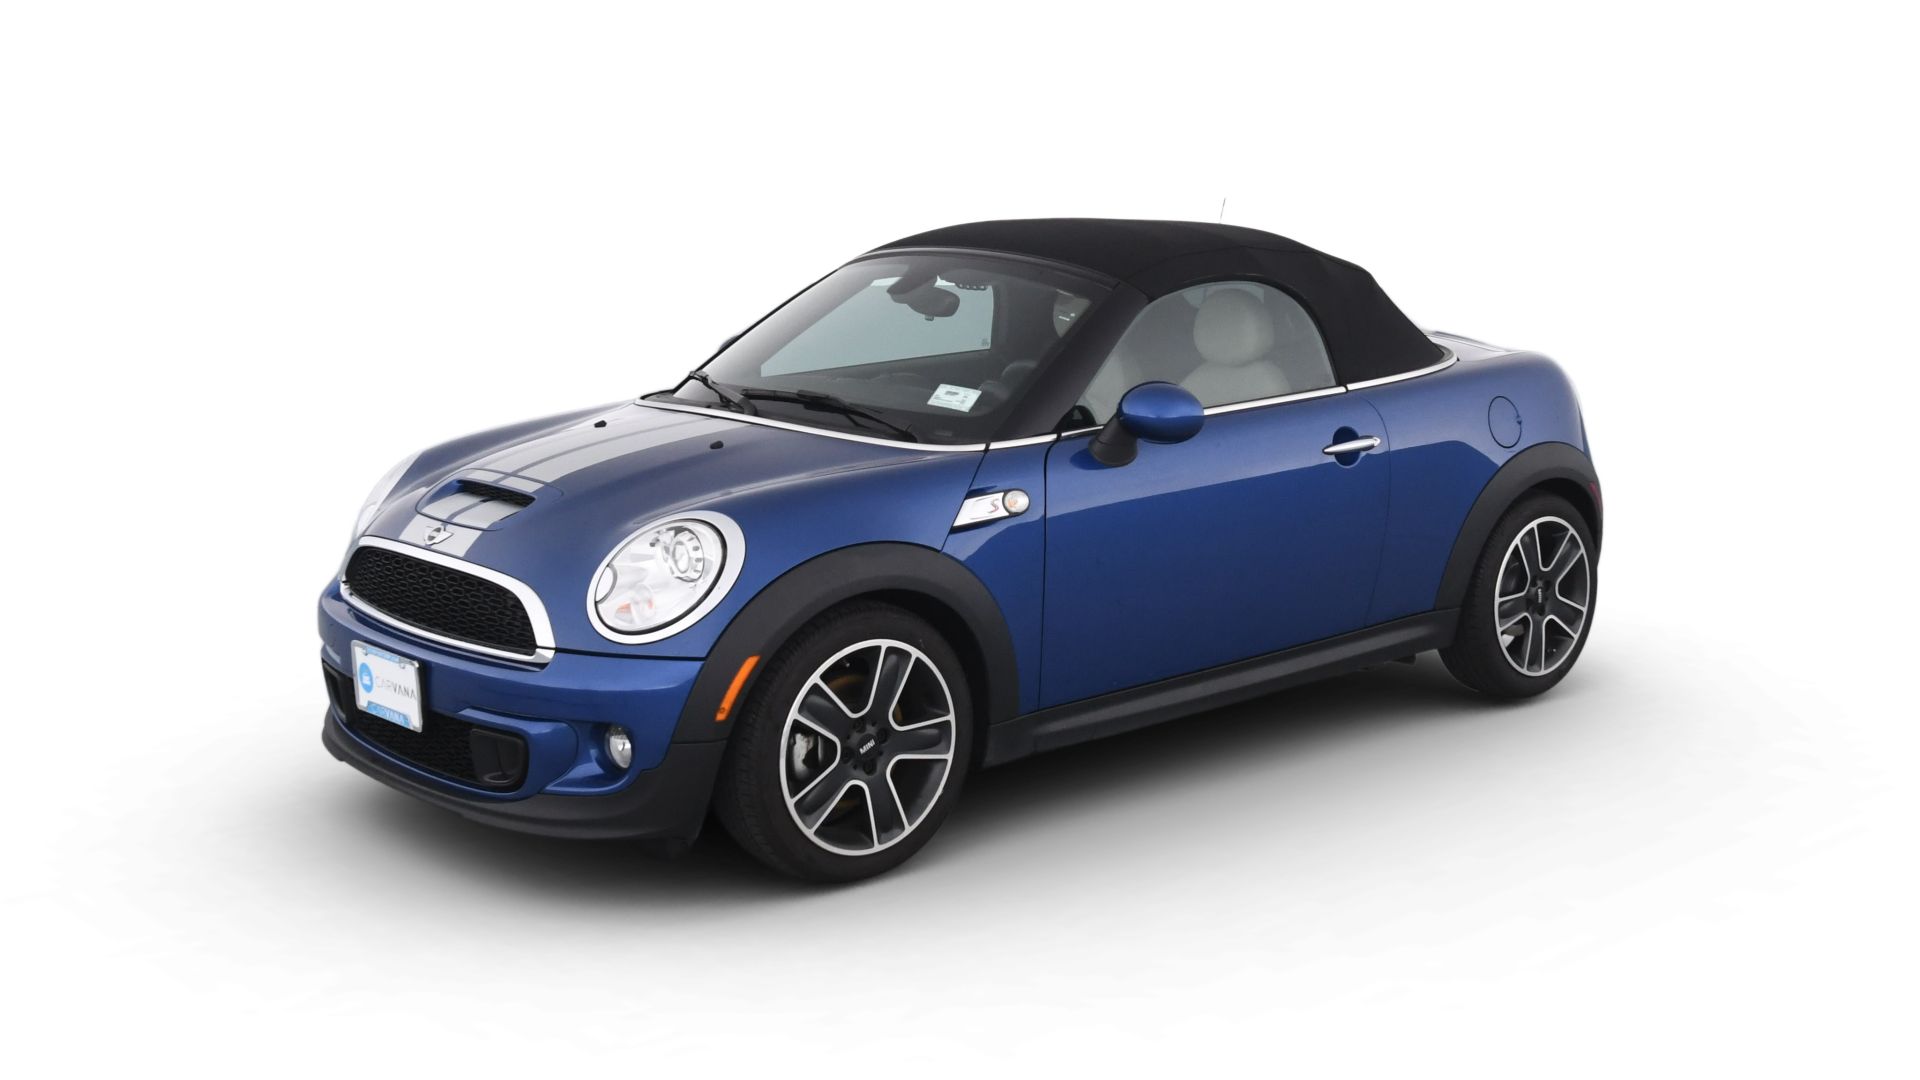 Used MINI Roadster For Sale Online | Carvana